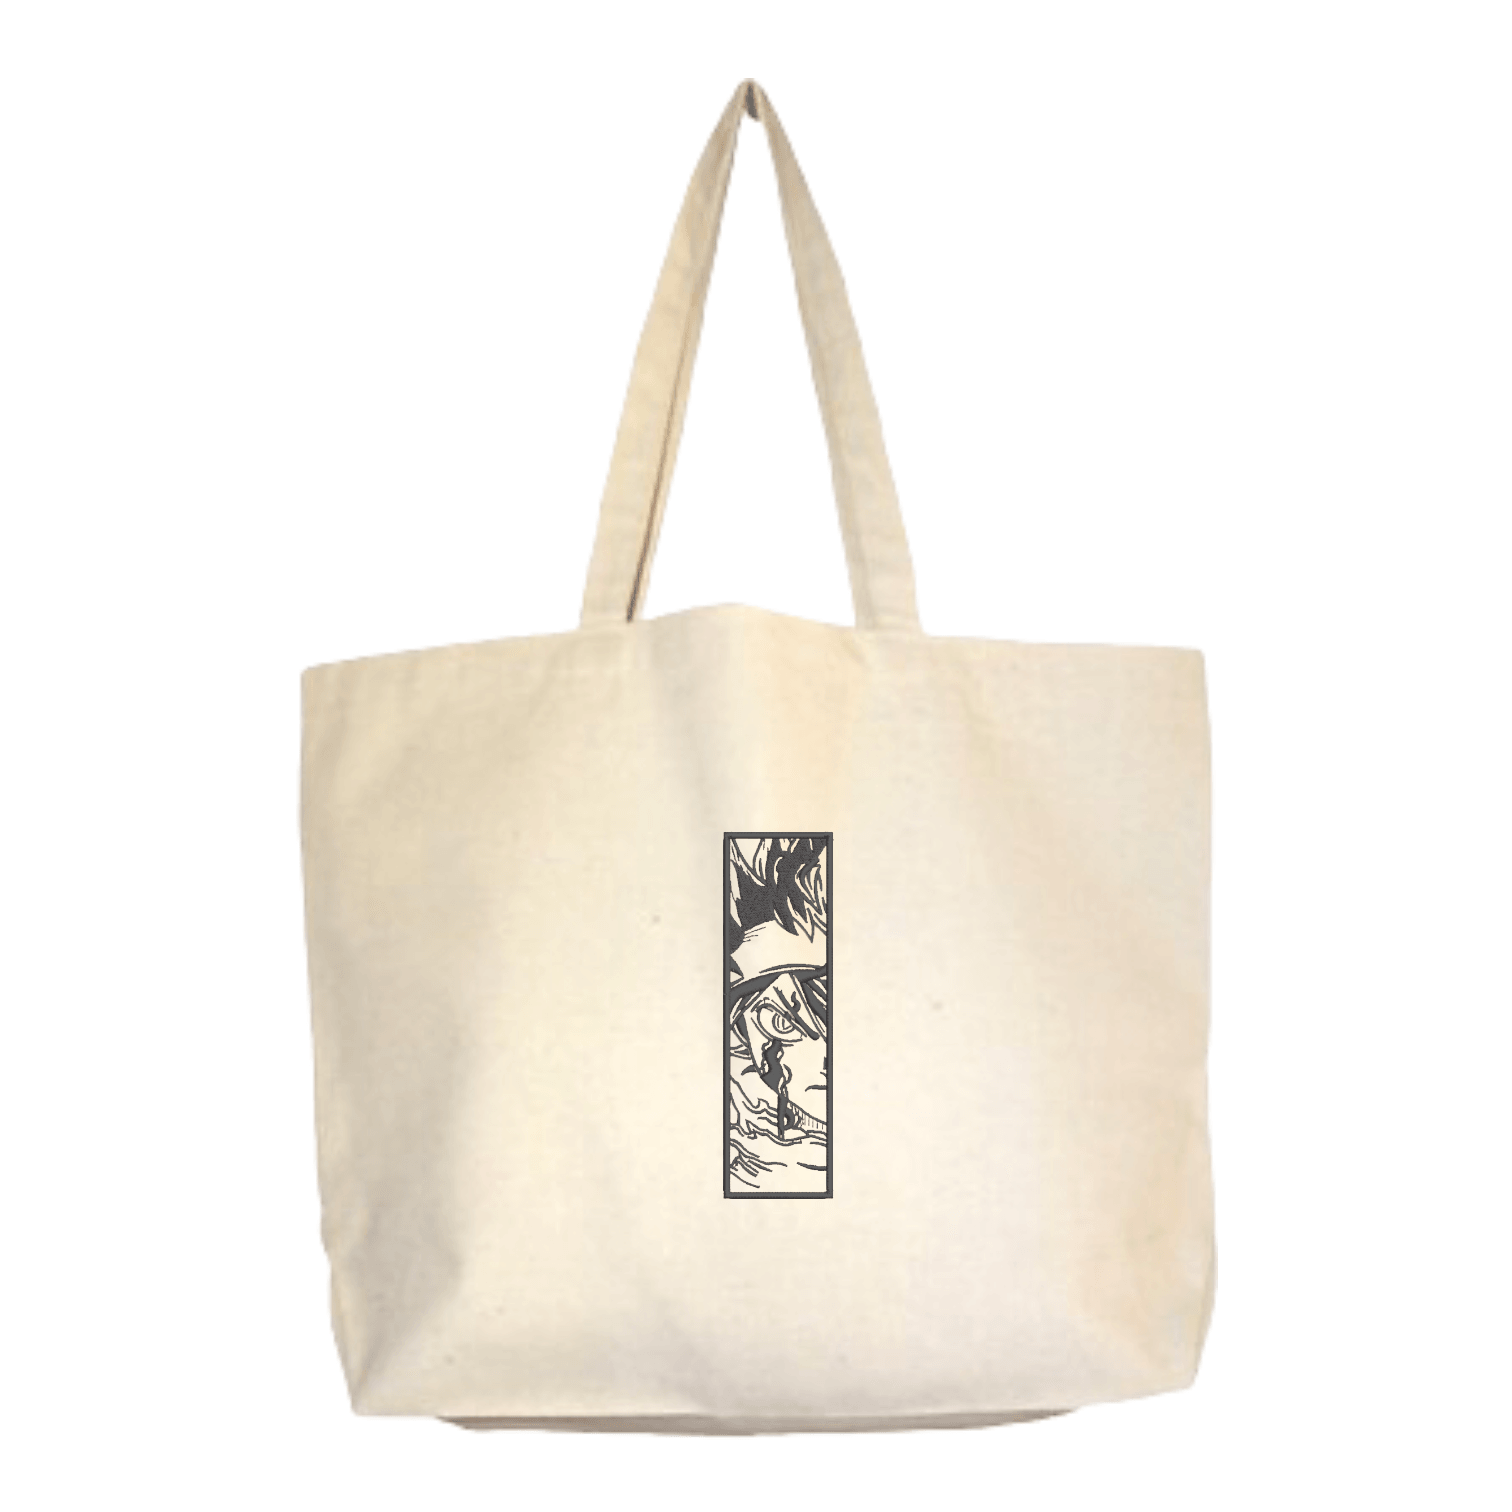 Anime Tote Bags PREORDER